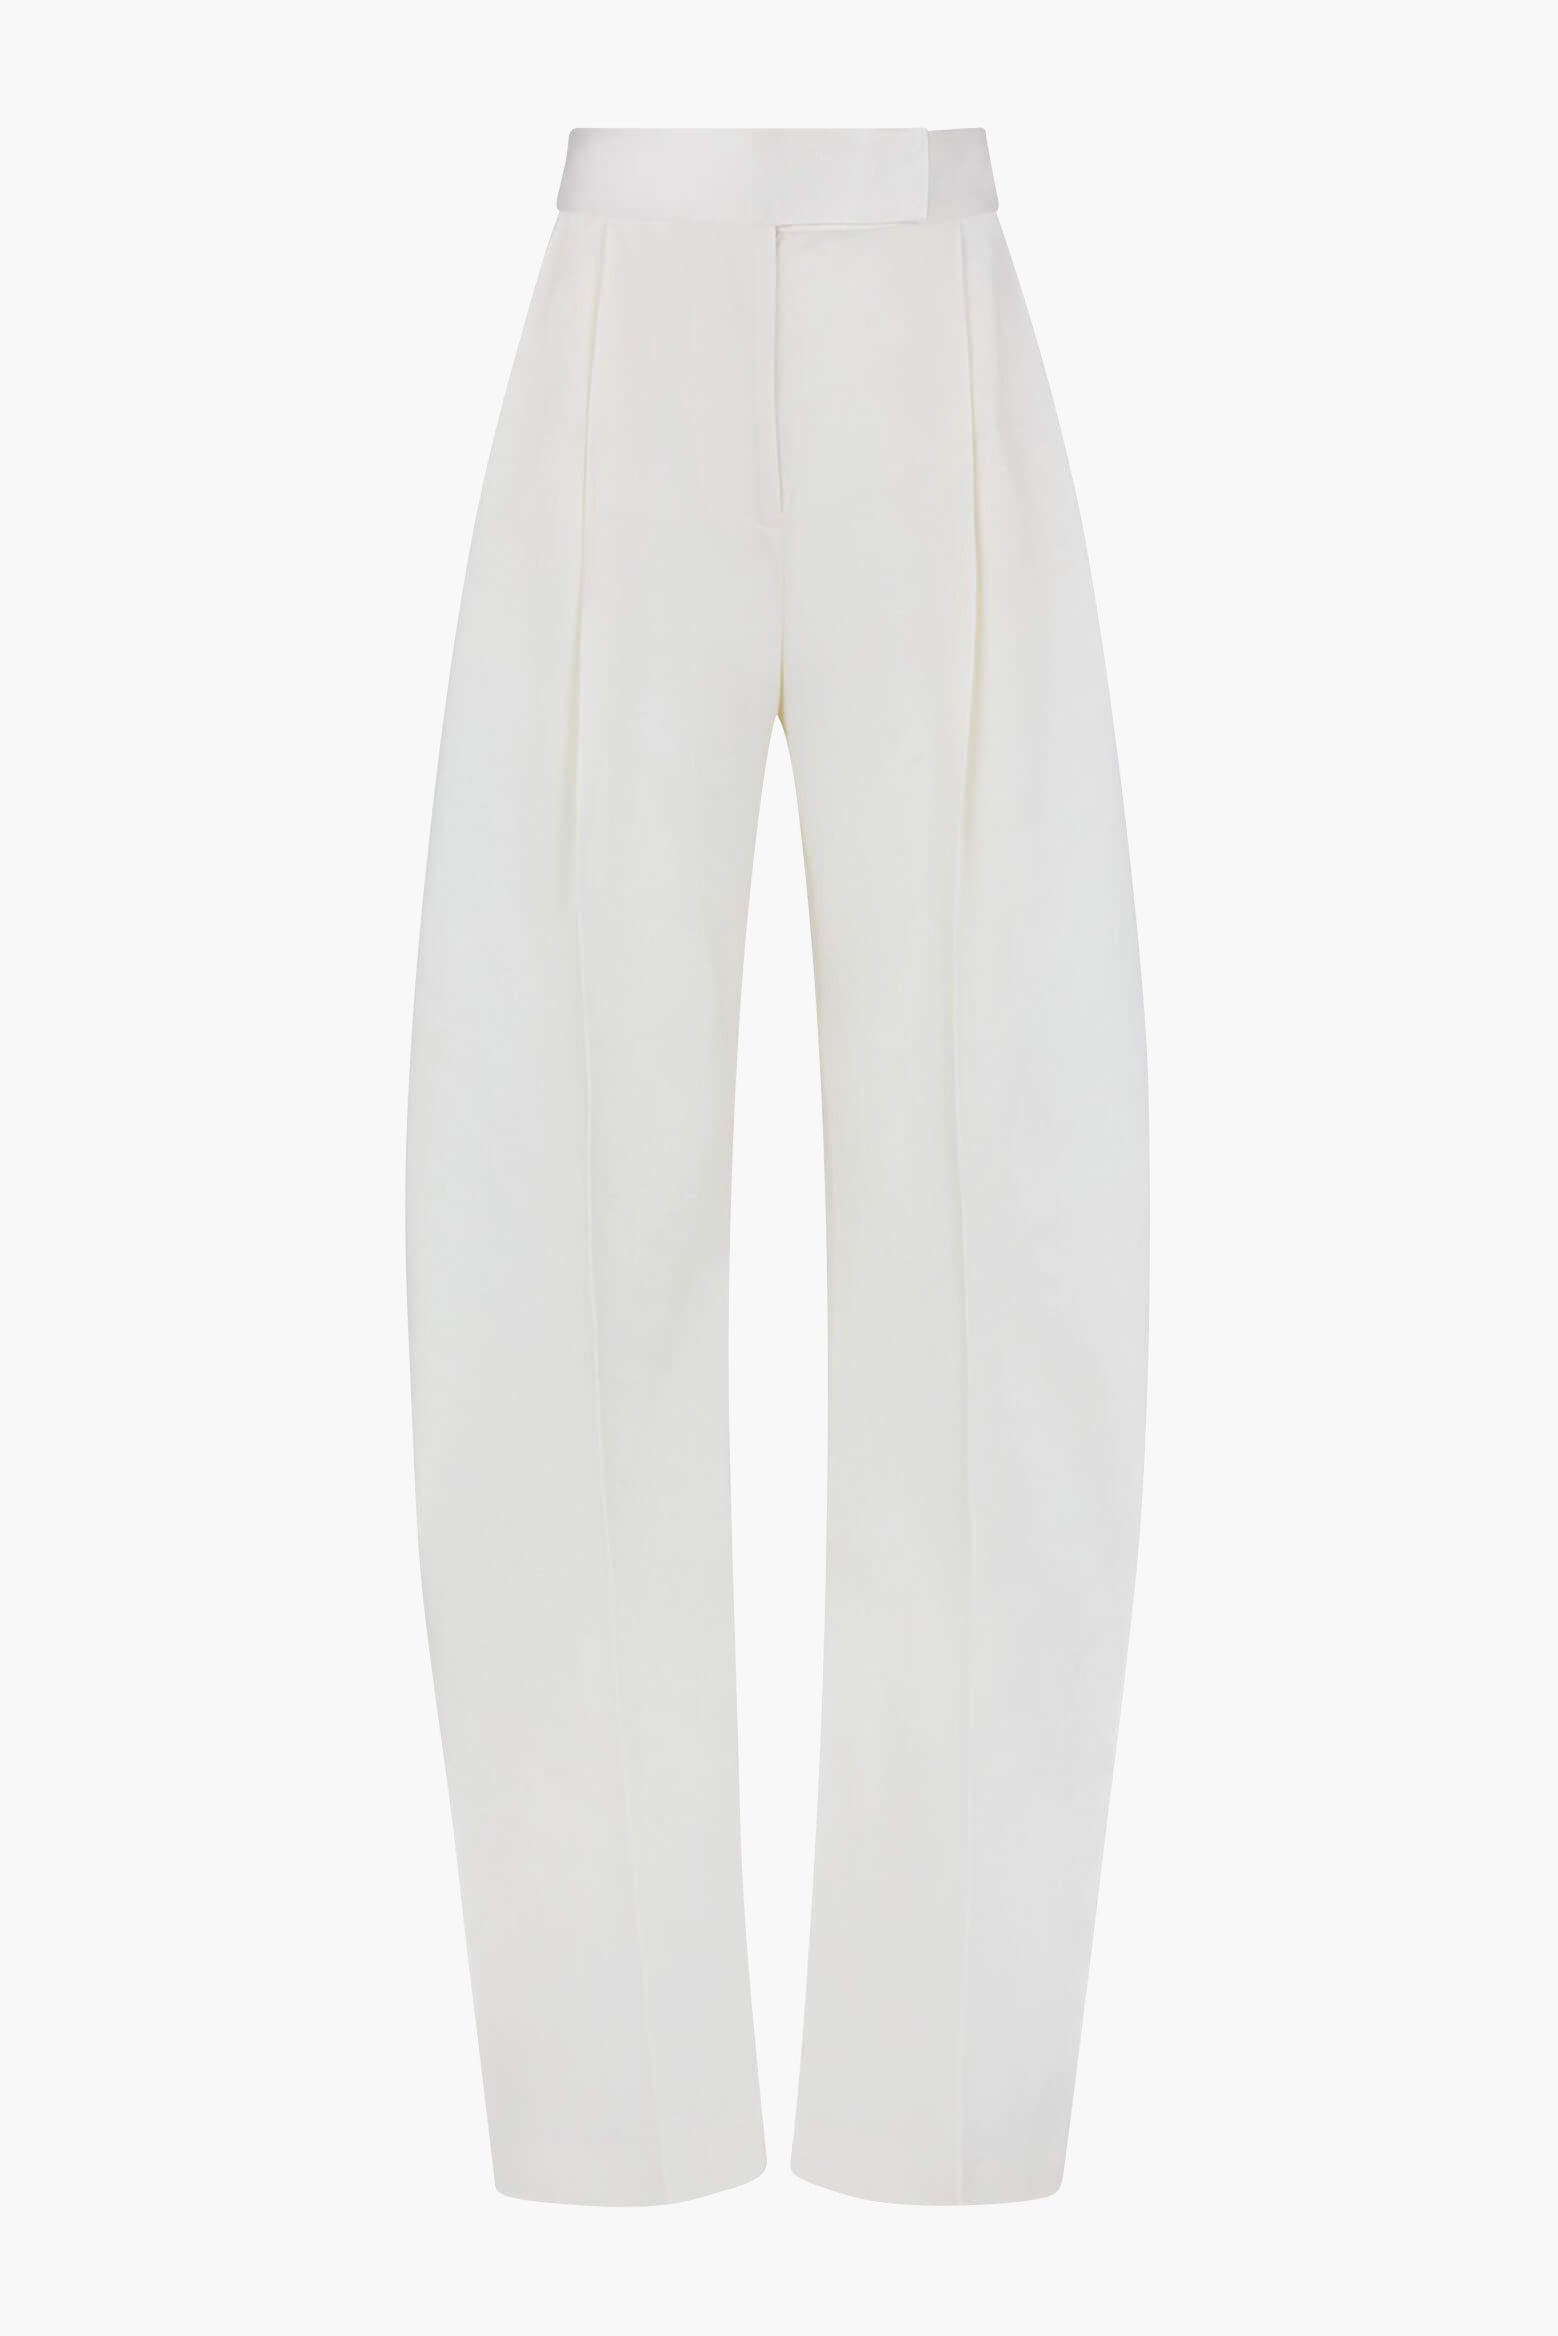 The Attico Gary Long Pants in Milk from The New Trend